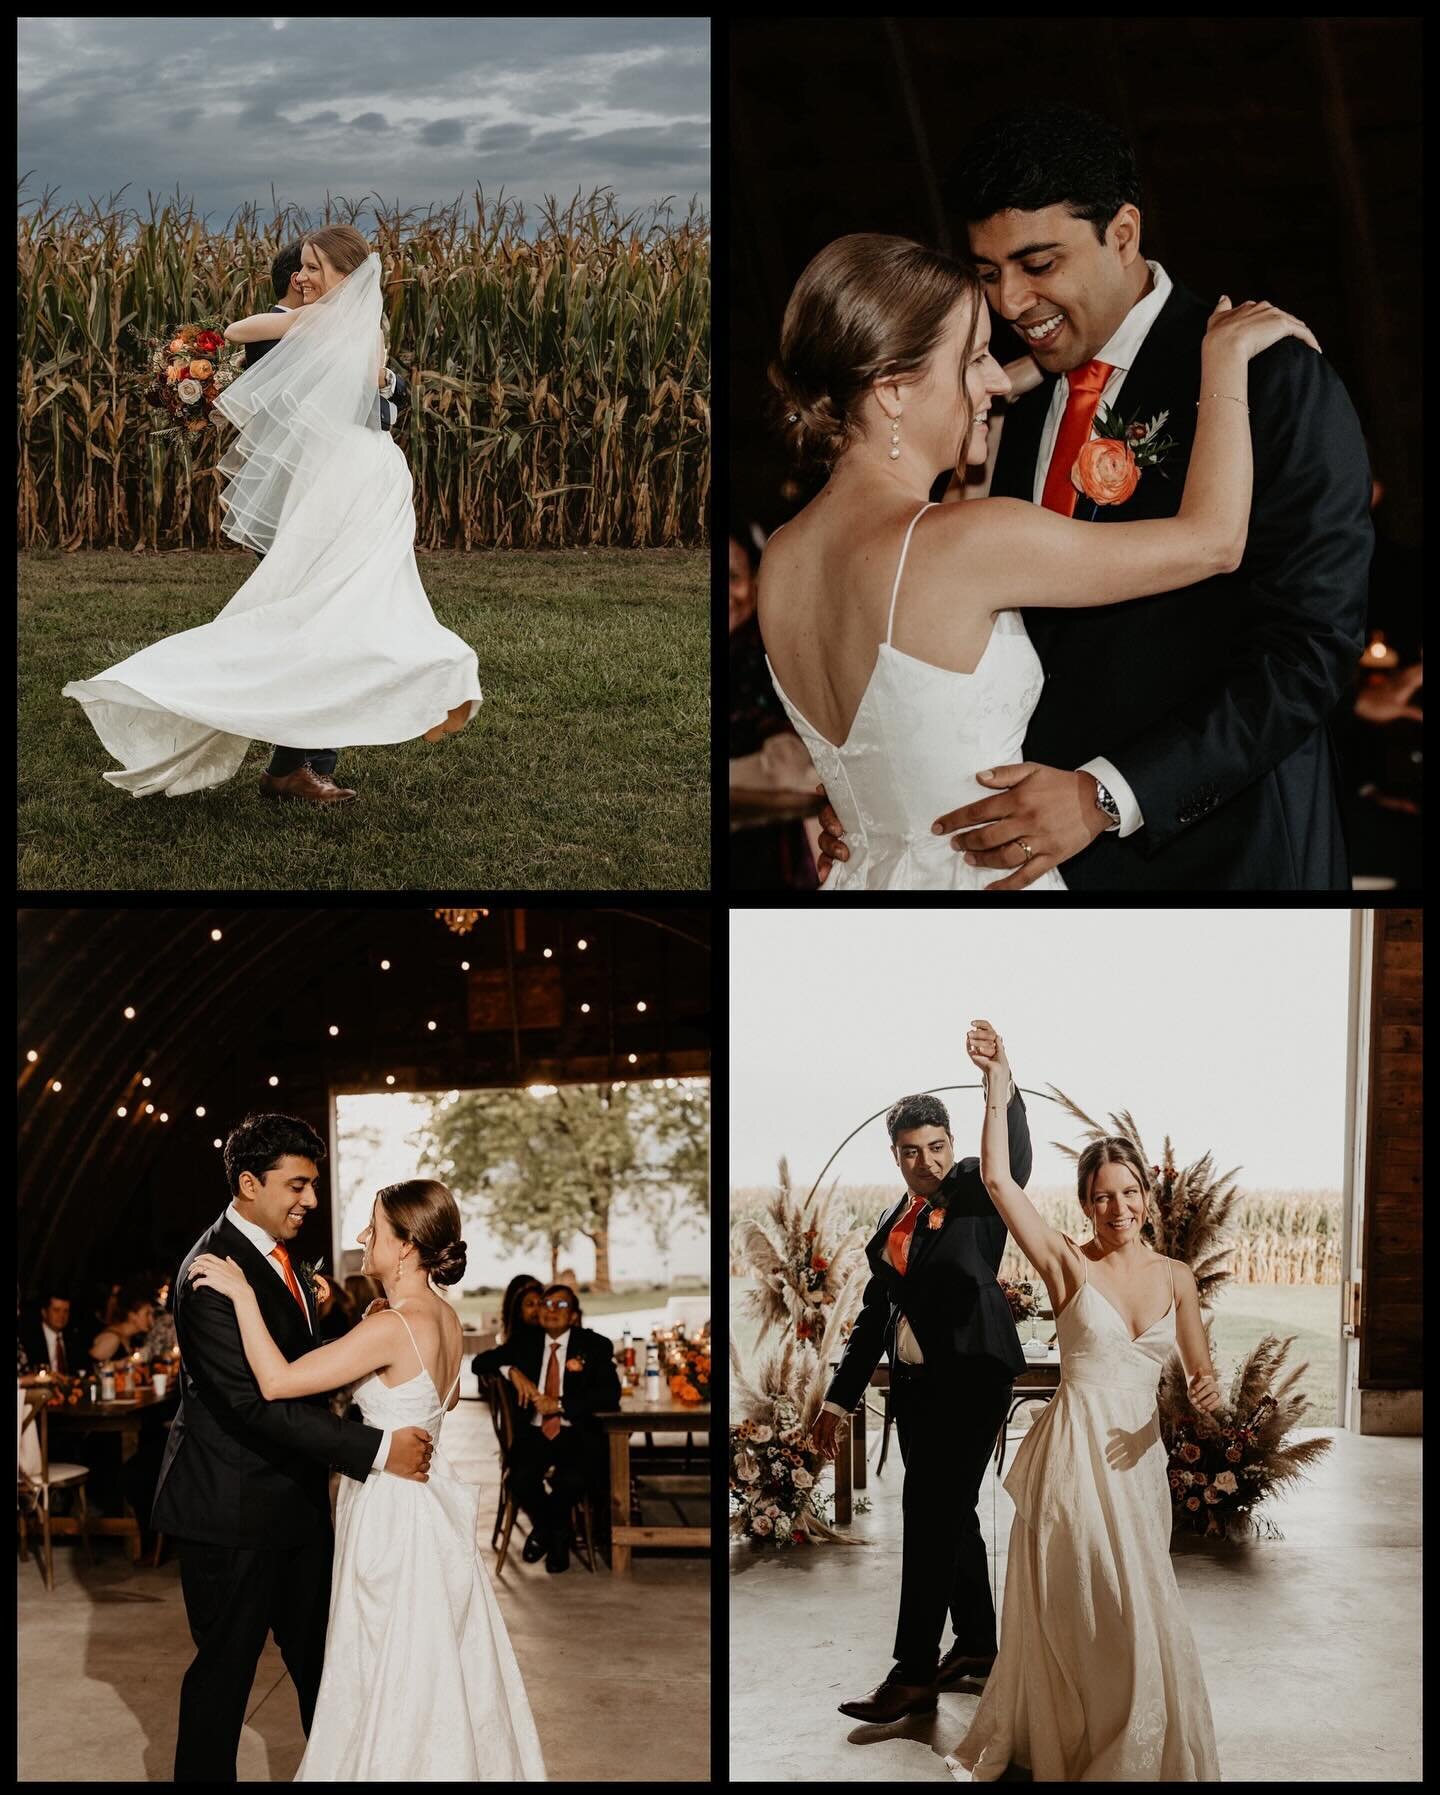 Some more lovely scenes from Hannah and Rijul's wedding at Harms Country Farms!

#chicagoweddings #chicagoweddingplanner #chicagoweddingphotography #chicagoweddingphotographer #chicagoweddingvideographer #chicagowedding #chicagoweddingvideos #wedding